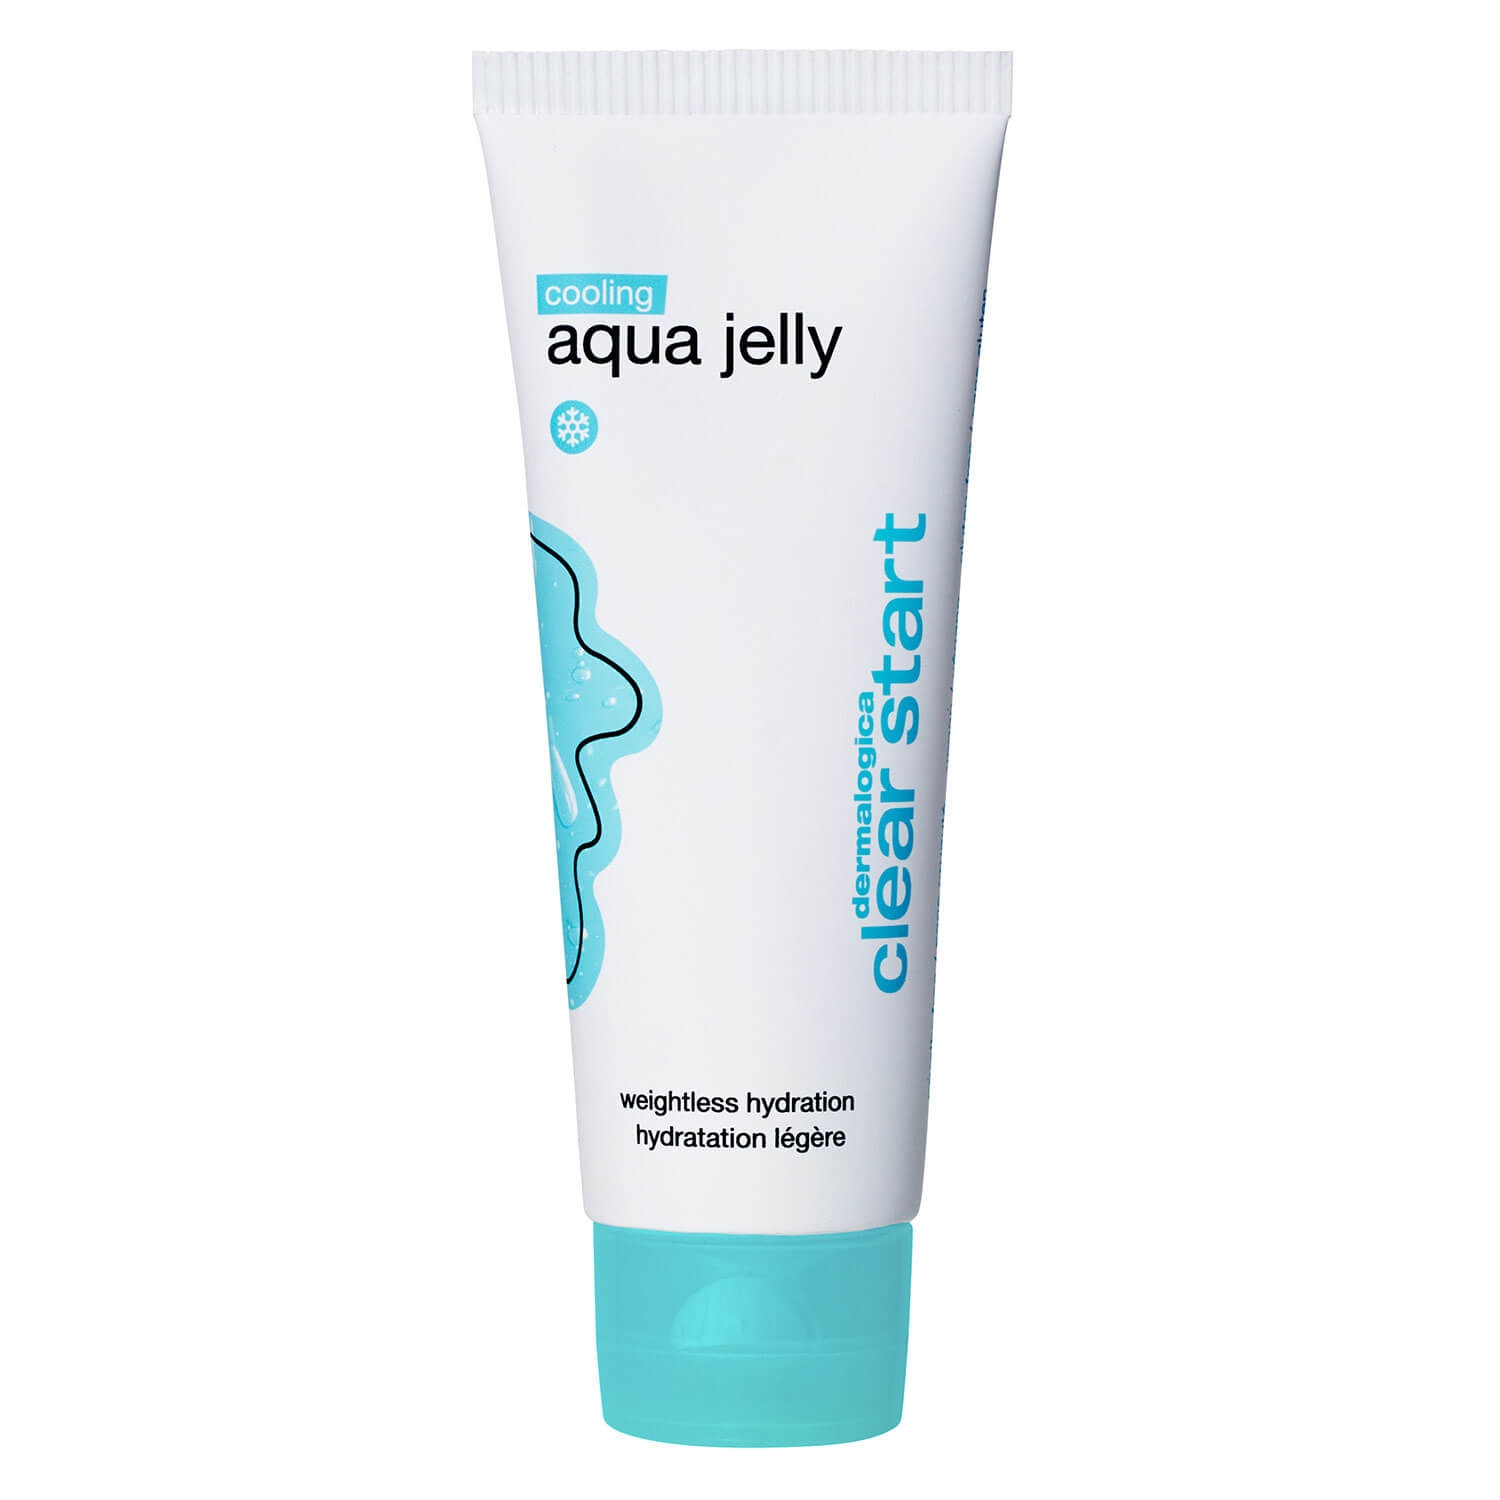 Product image from Moisturizers - Cooling Aqua Jelly